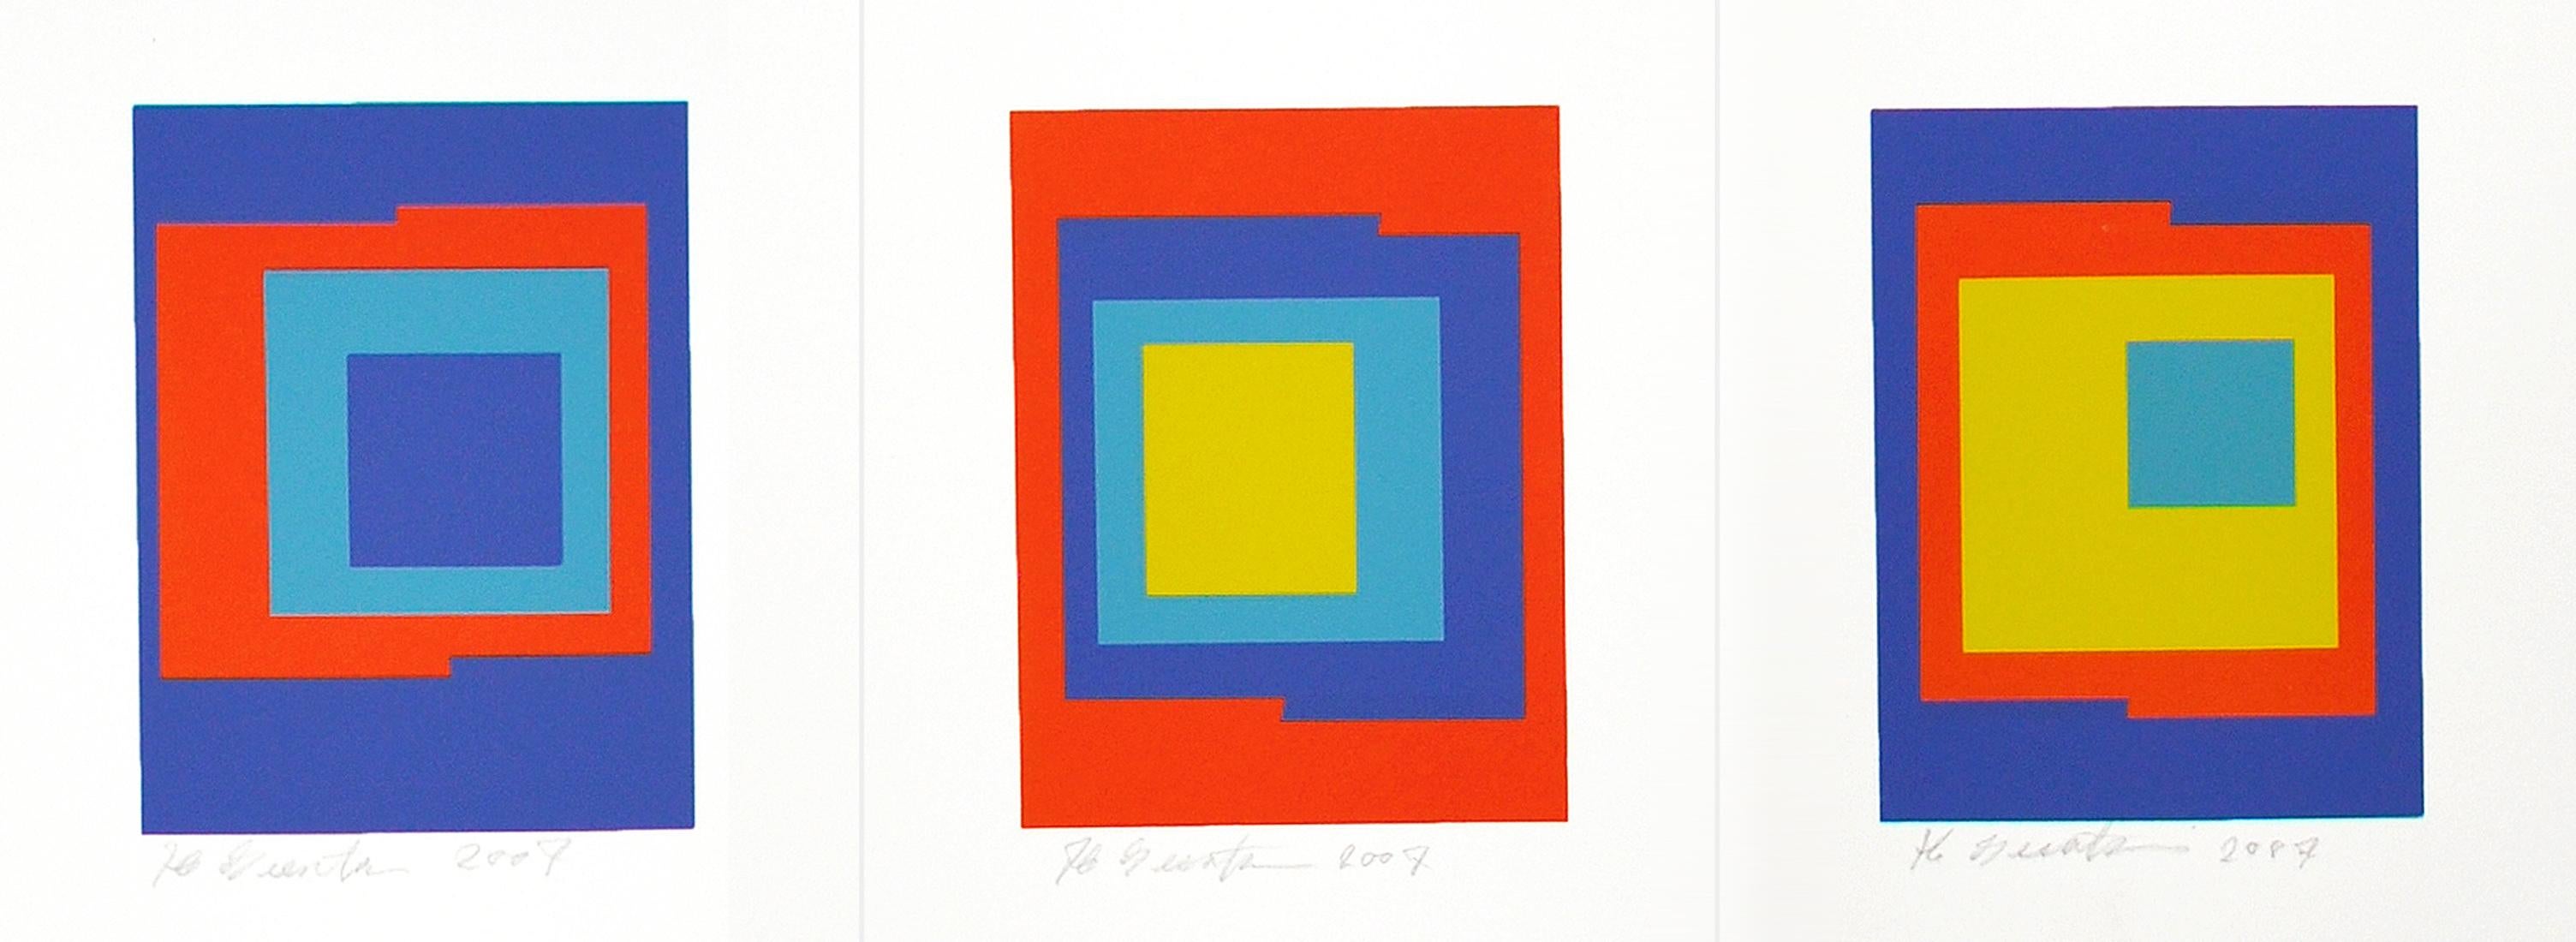 Screen Prints (3) by Ib Geertsen, signed, 2007.
Ib Geertsen (1919-2009) worked with the concrete art, where the line, shape, color and movement are the content.

Occupation: sculptor, painter, graphic artist, color architect

Geertsens works are art